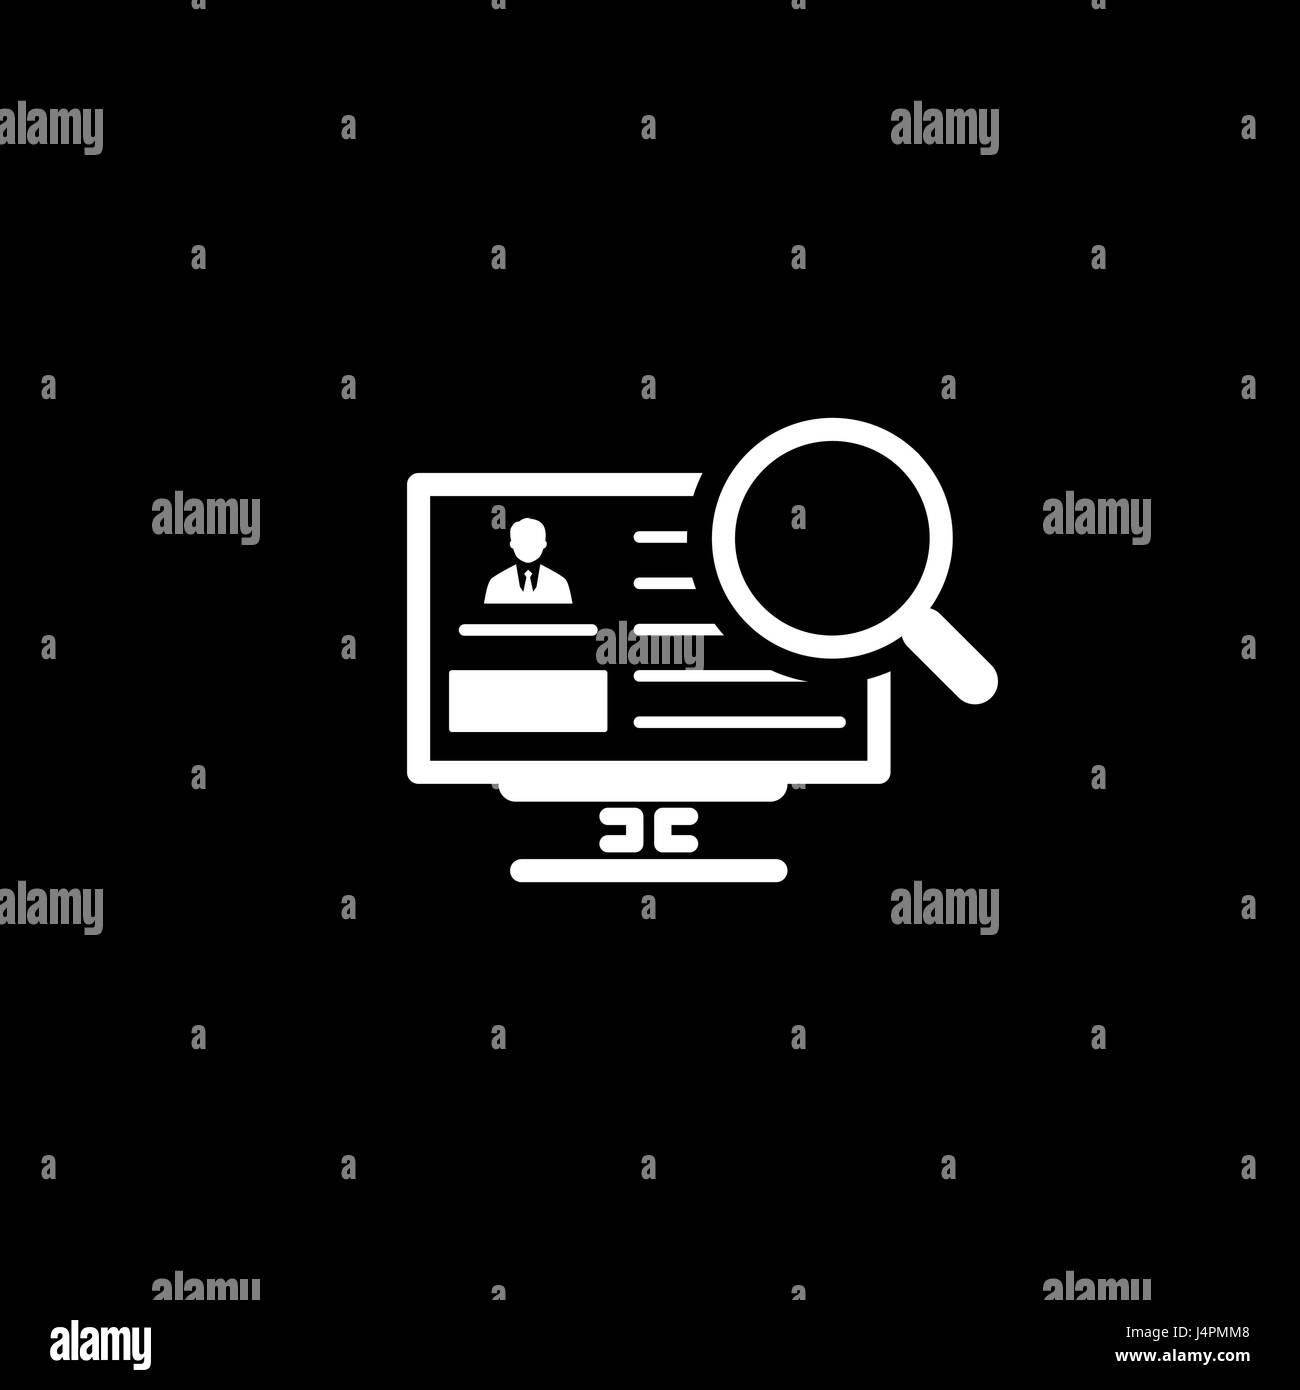 Search for Partners Icon. Business Concept. Flat Design. Stock Vector